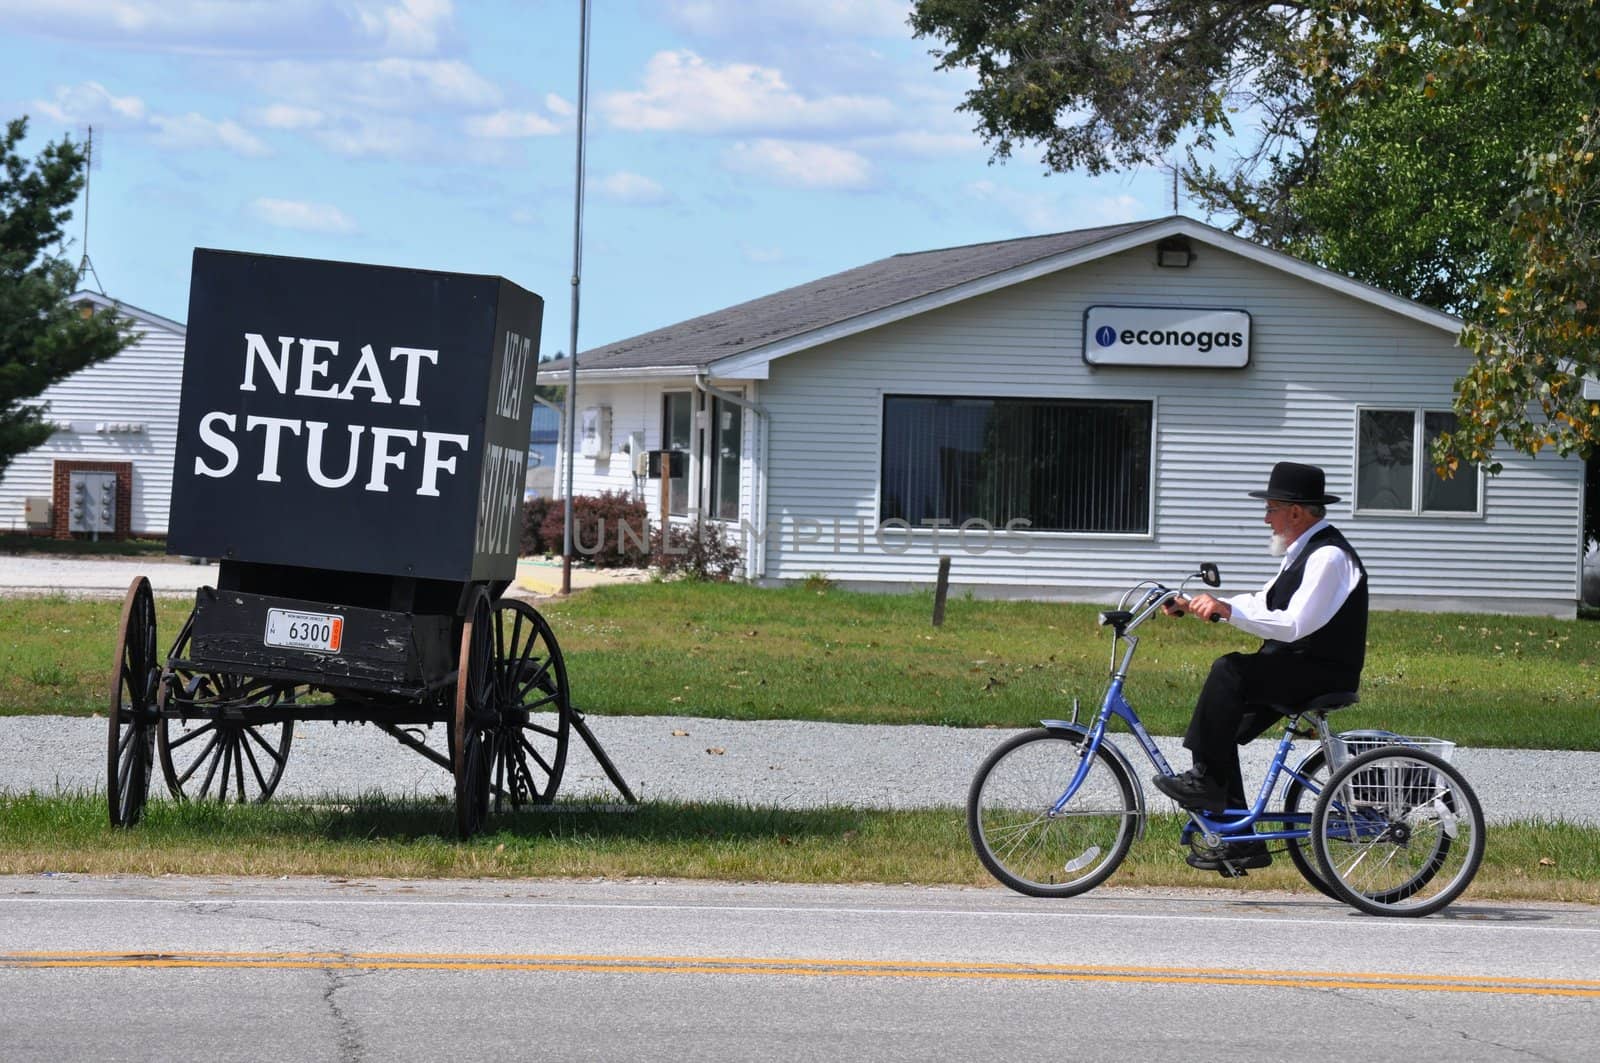 Amish man and Neat Stuff by RefocusPhoto